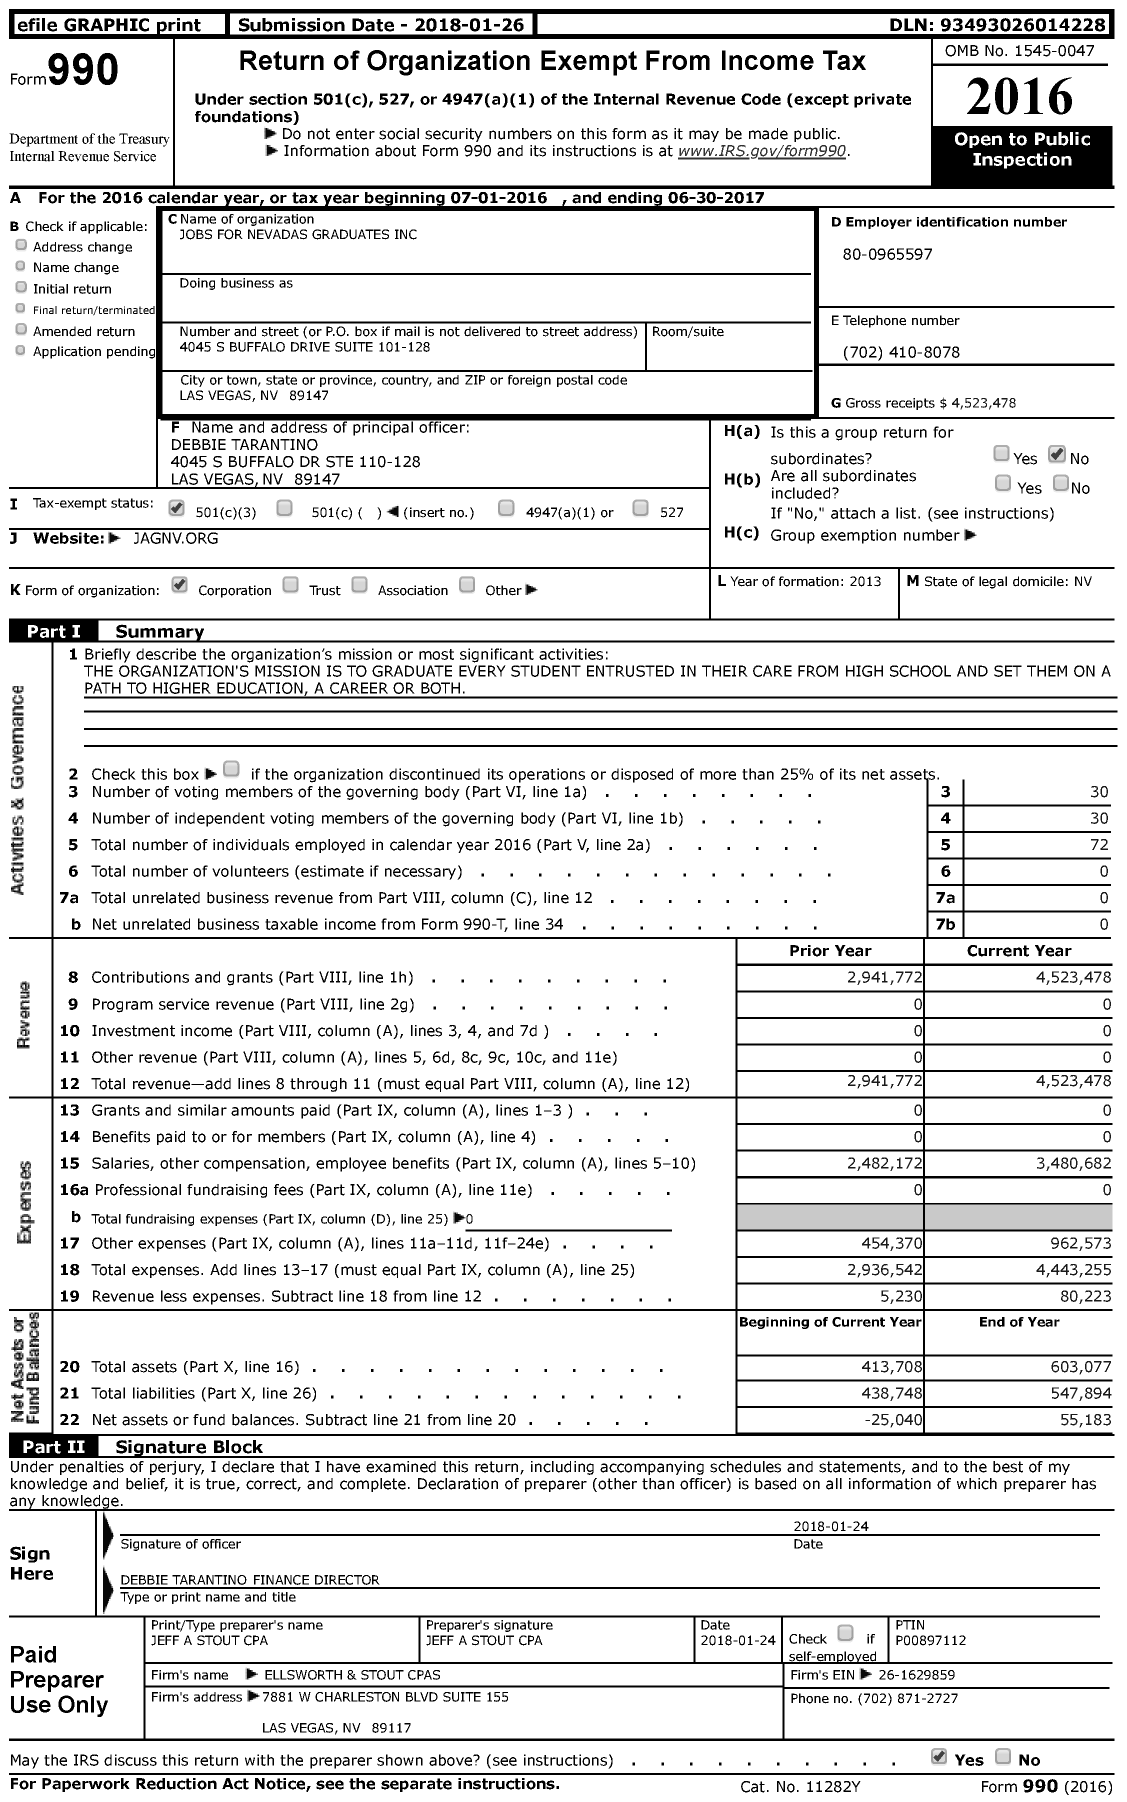 Image of first page of 2016 Form 990 for Jobs for Nevada's Graduates